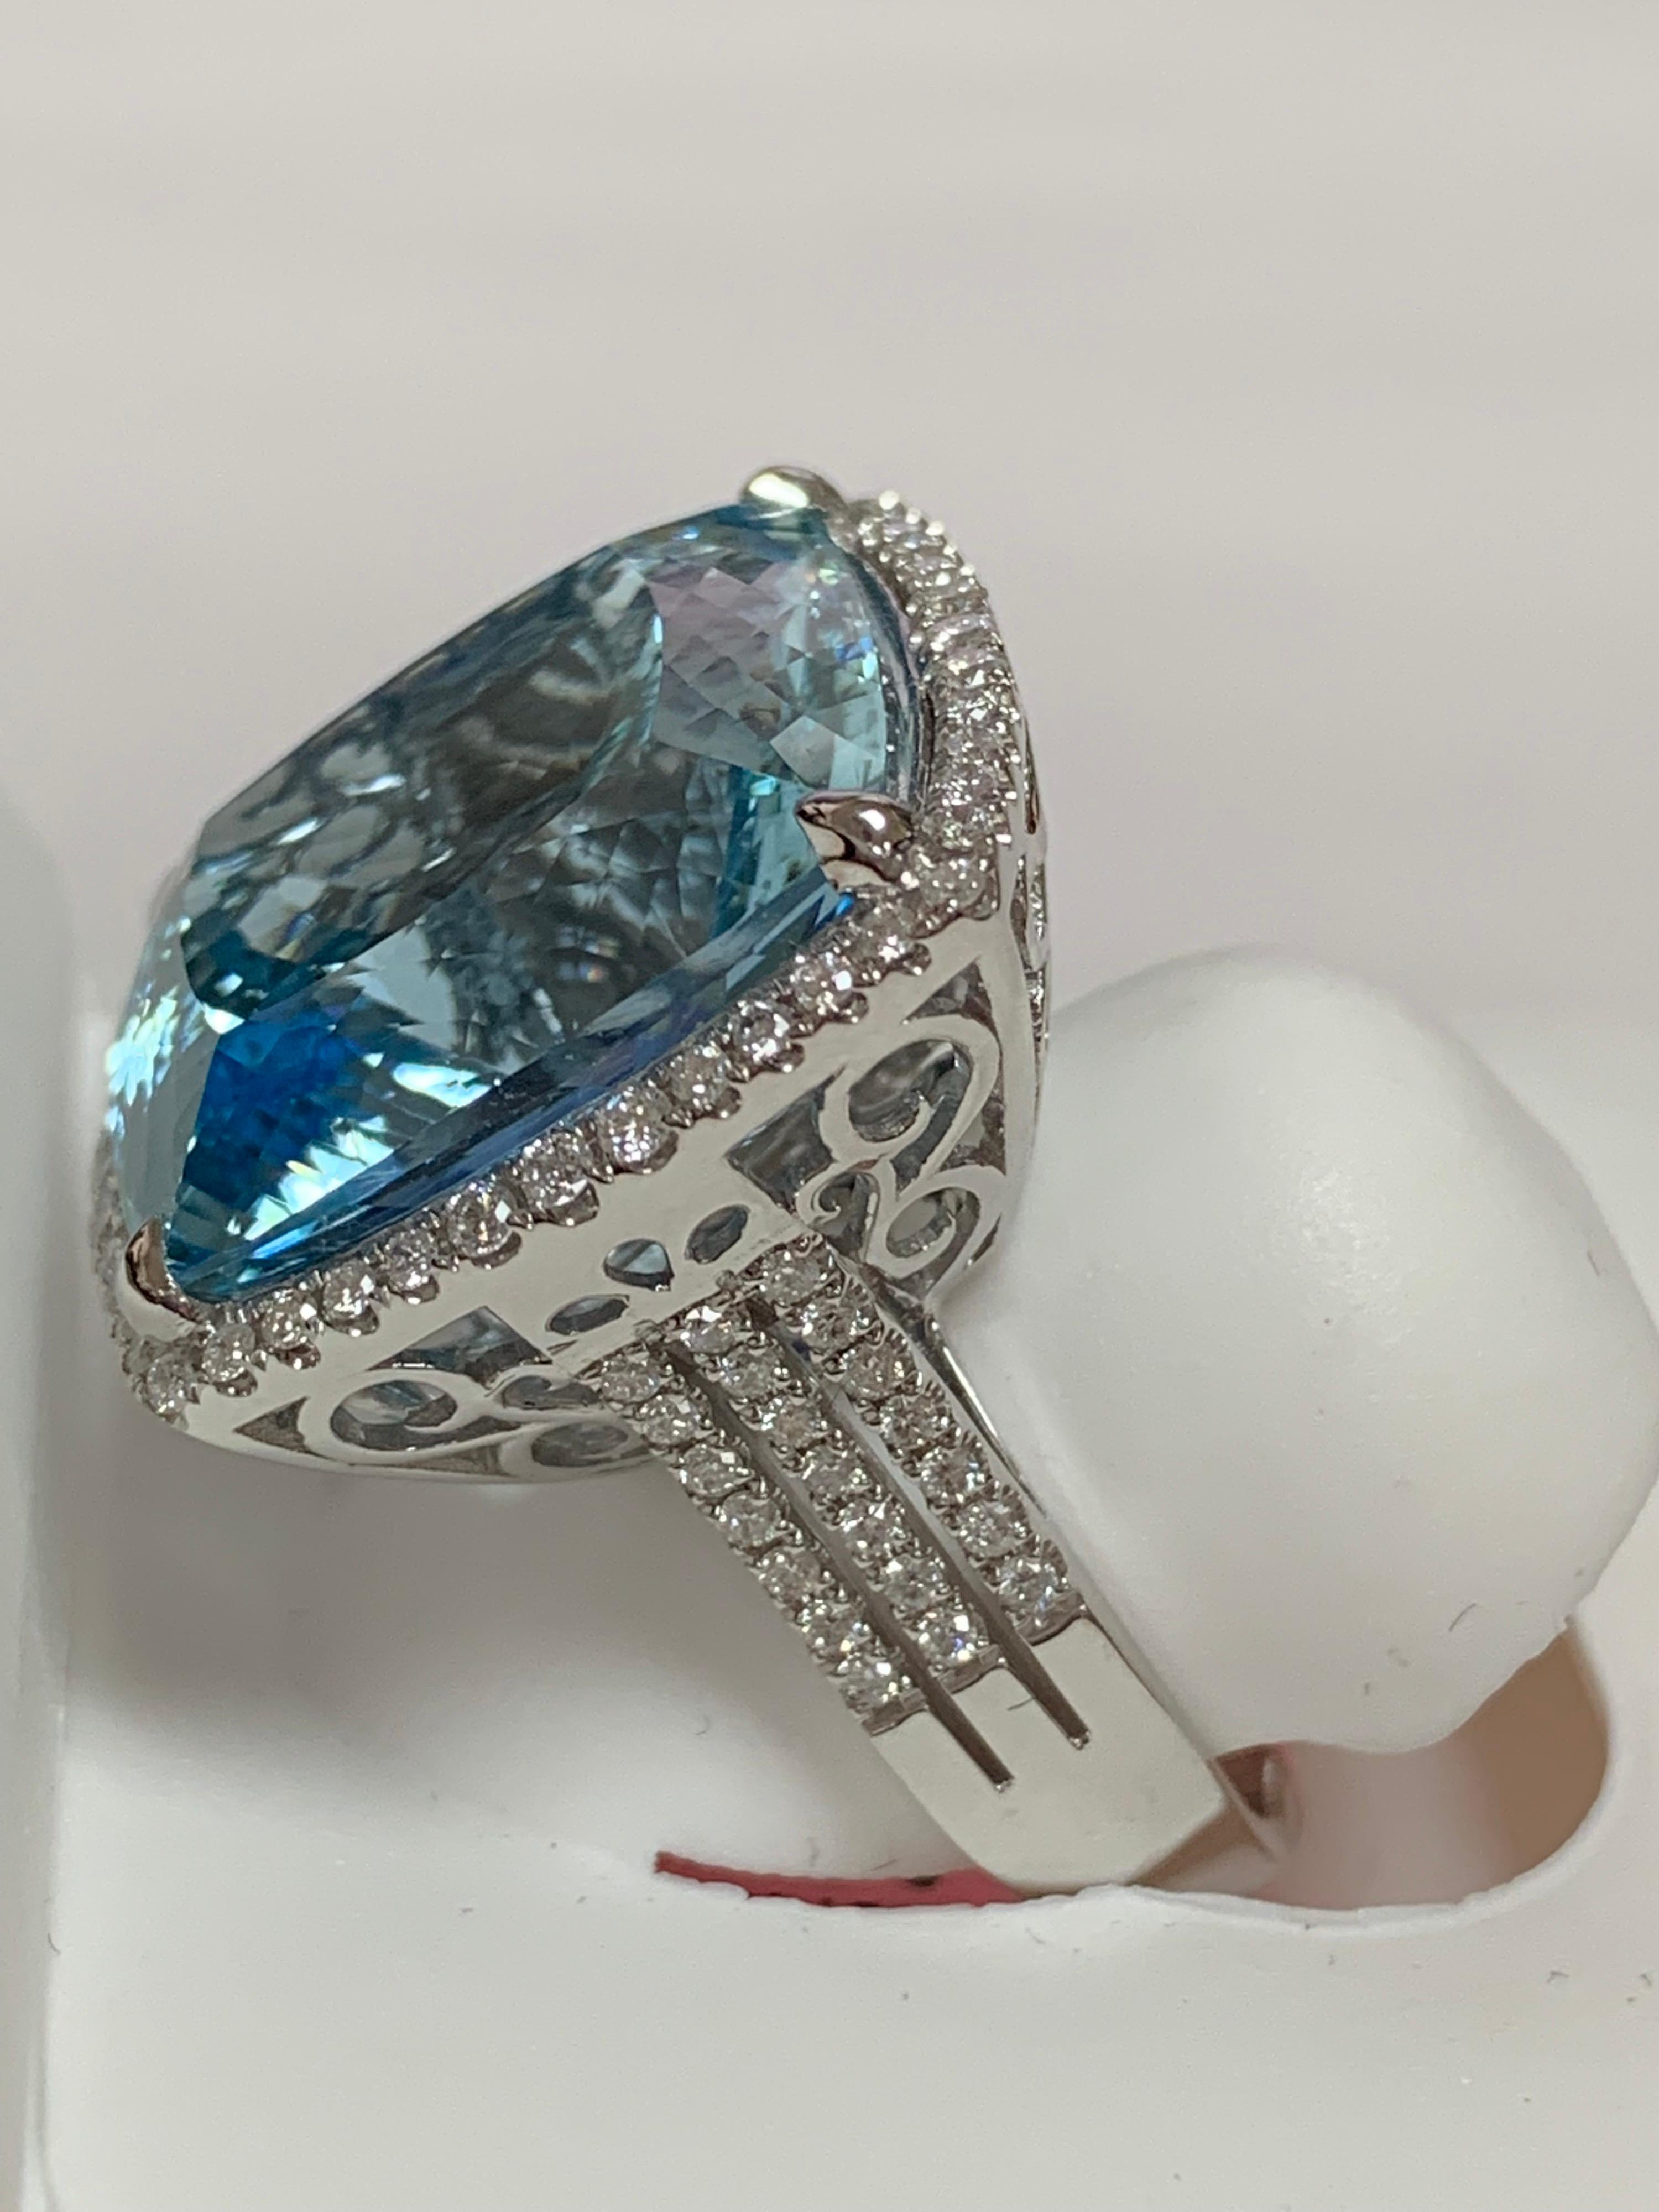 Natural Cushion shape 24.45 Carat Aquamarine and 0.65 Carat white diamonds set in 14 Karat white gold is one of a kind handcrafted ring.Size of the ring is 7 and can be resized if needed.